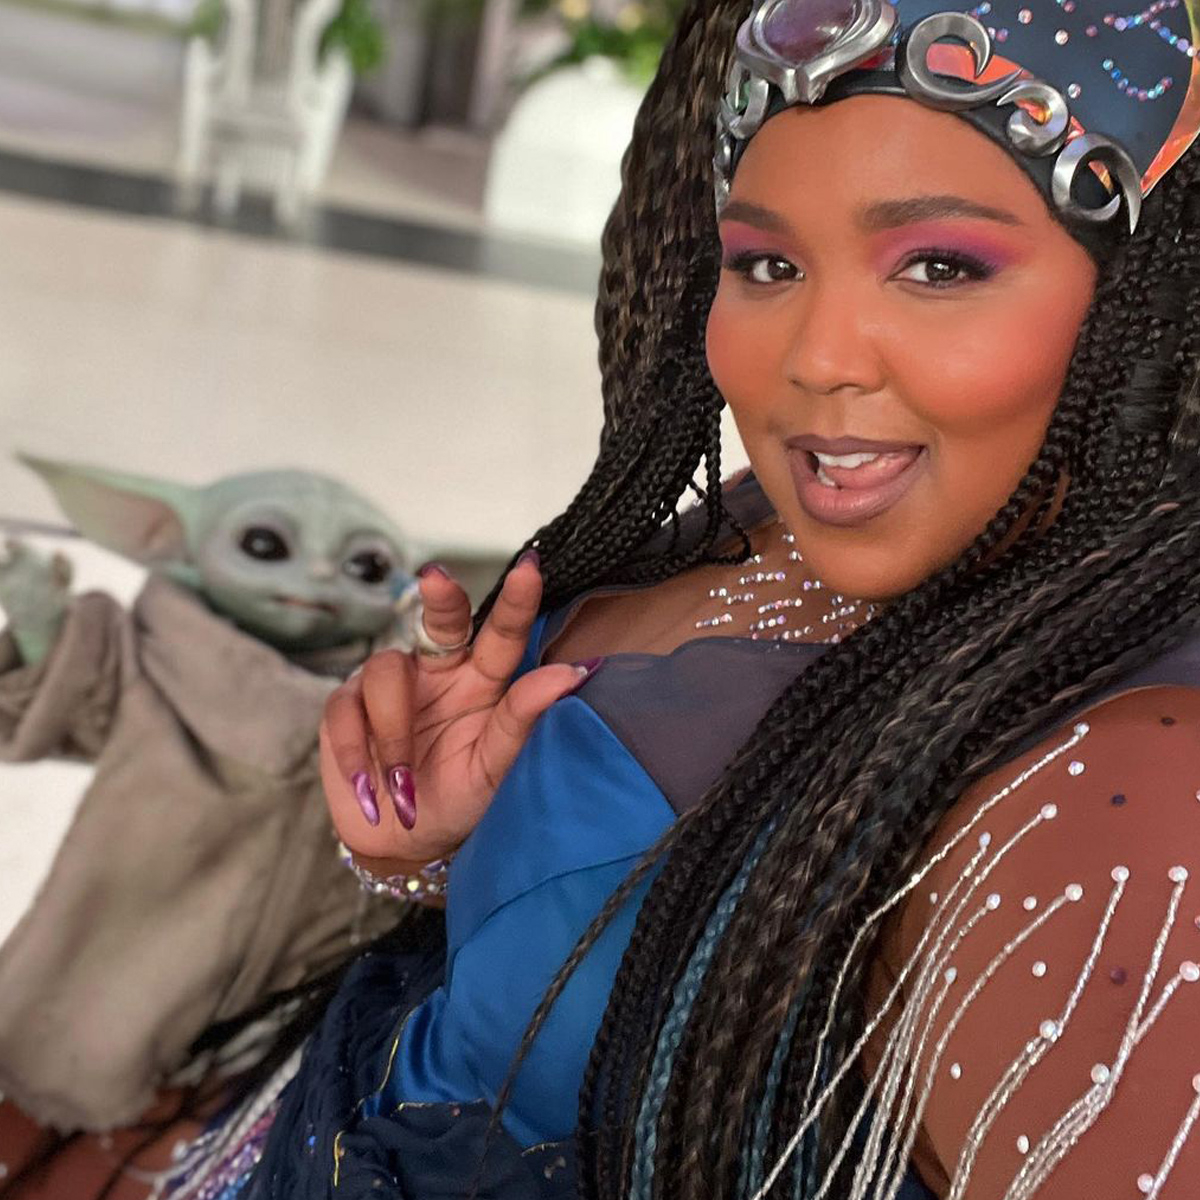 Why Lizzo “Cried All Day” About Surprise Mandalorian Appearance